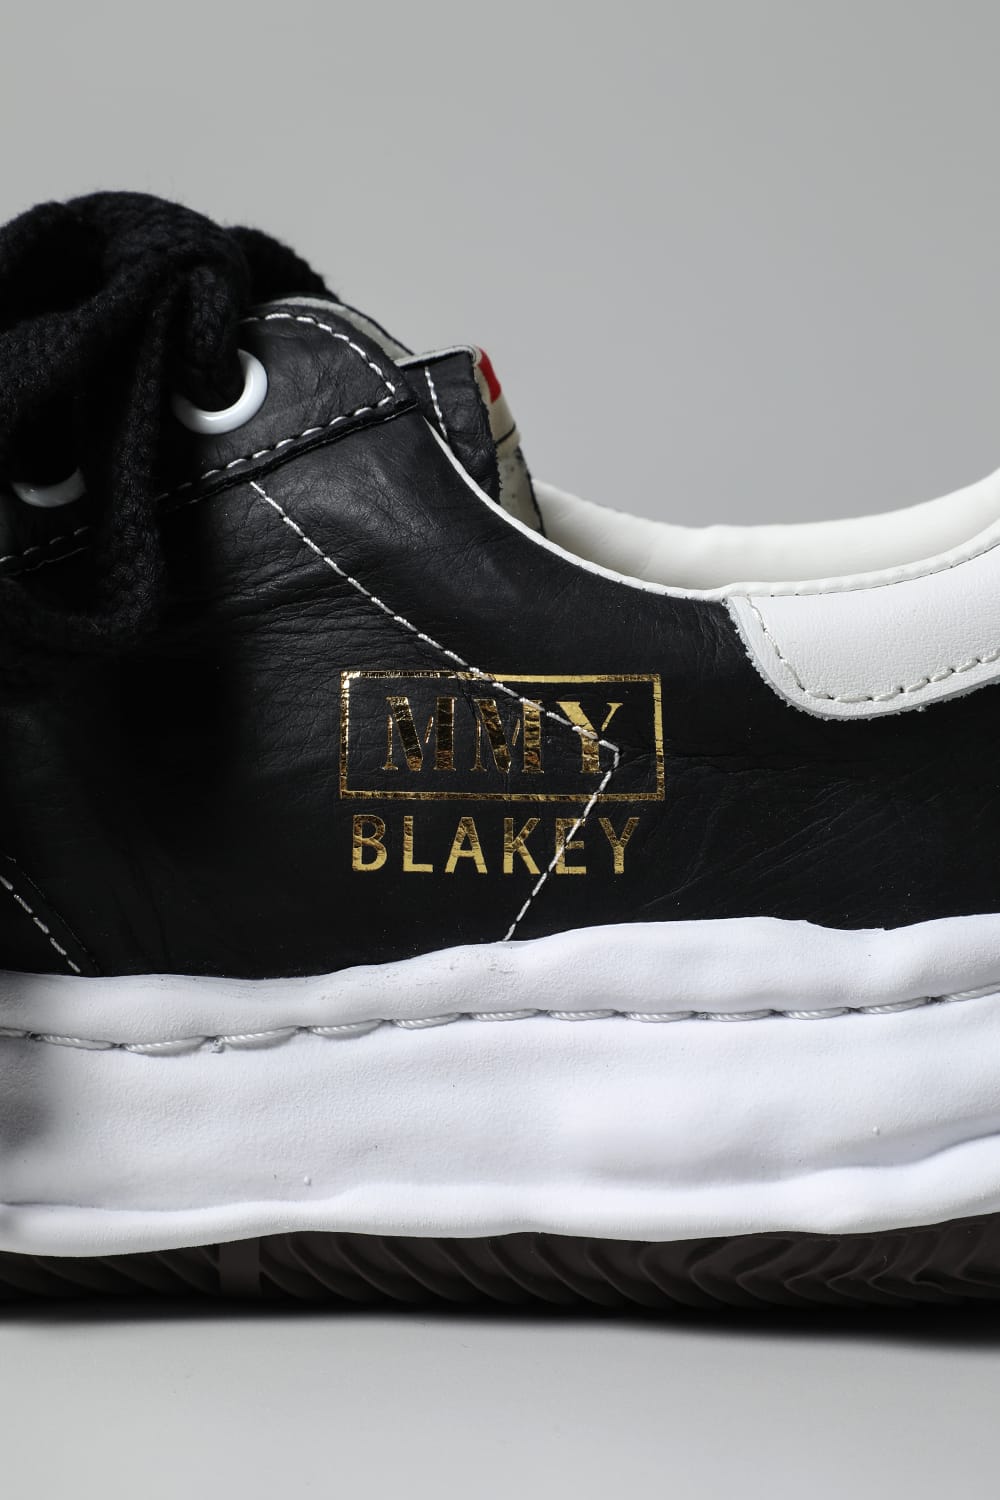 -BLAKEY Low- Original STC sole paper like leather Low-Top sneakers Black